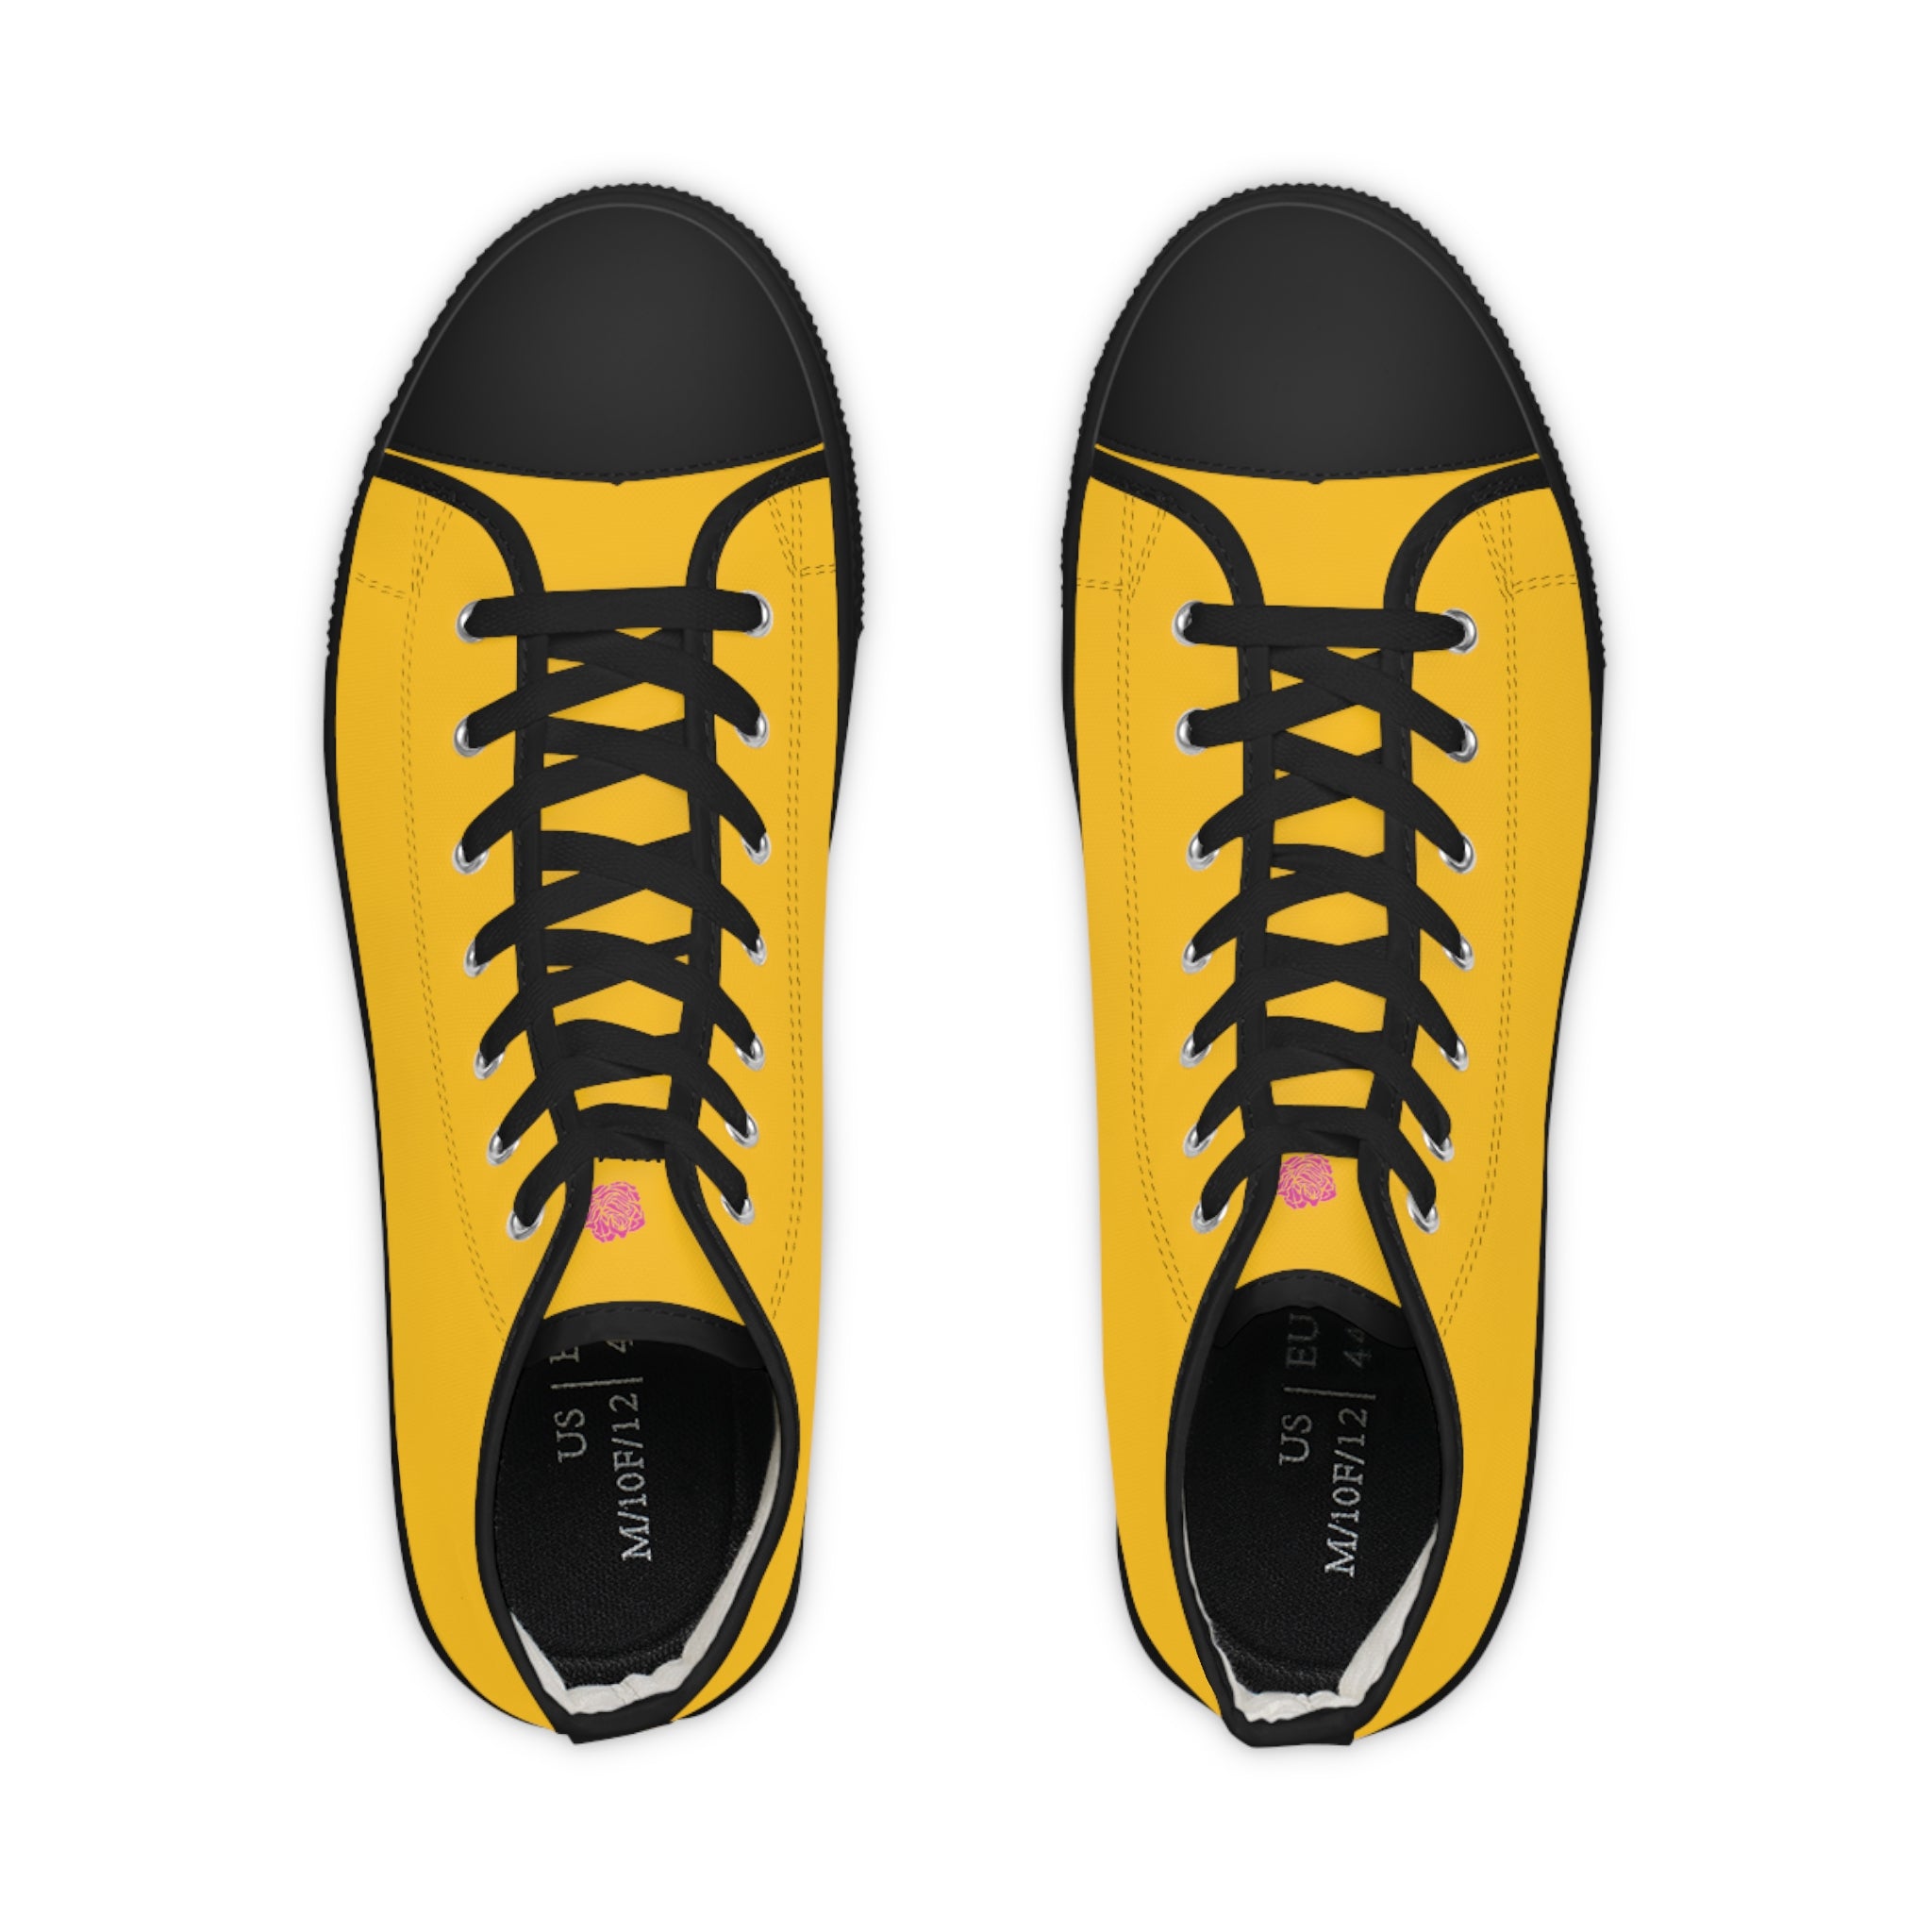 Yellow Color Men's High Tops, Modern Minimalist Solid Yellow Color Best Men's High Top Laced Up Black or White Style Breathable Fashion Canvas Sneakers Tennis Athletic Style Shoes For Men (US Size: 5-14)